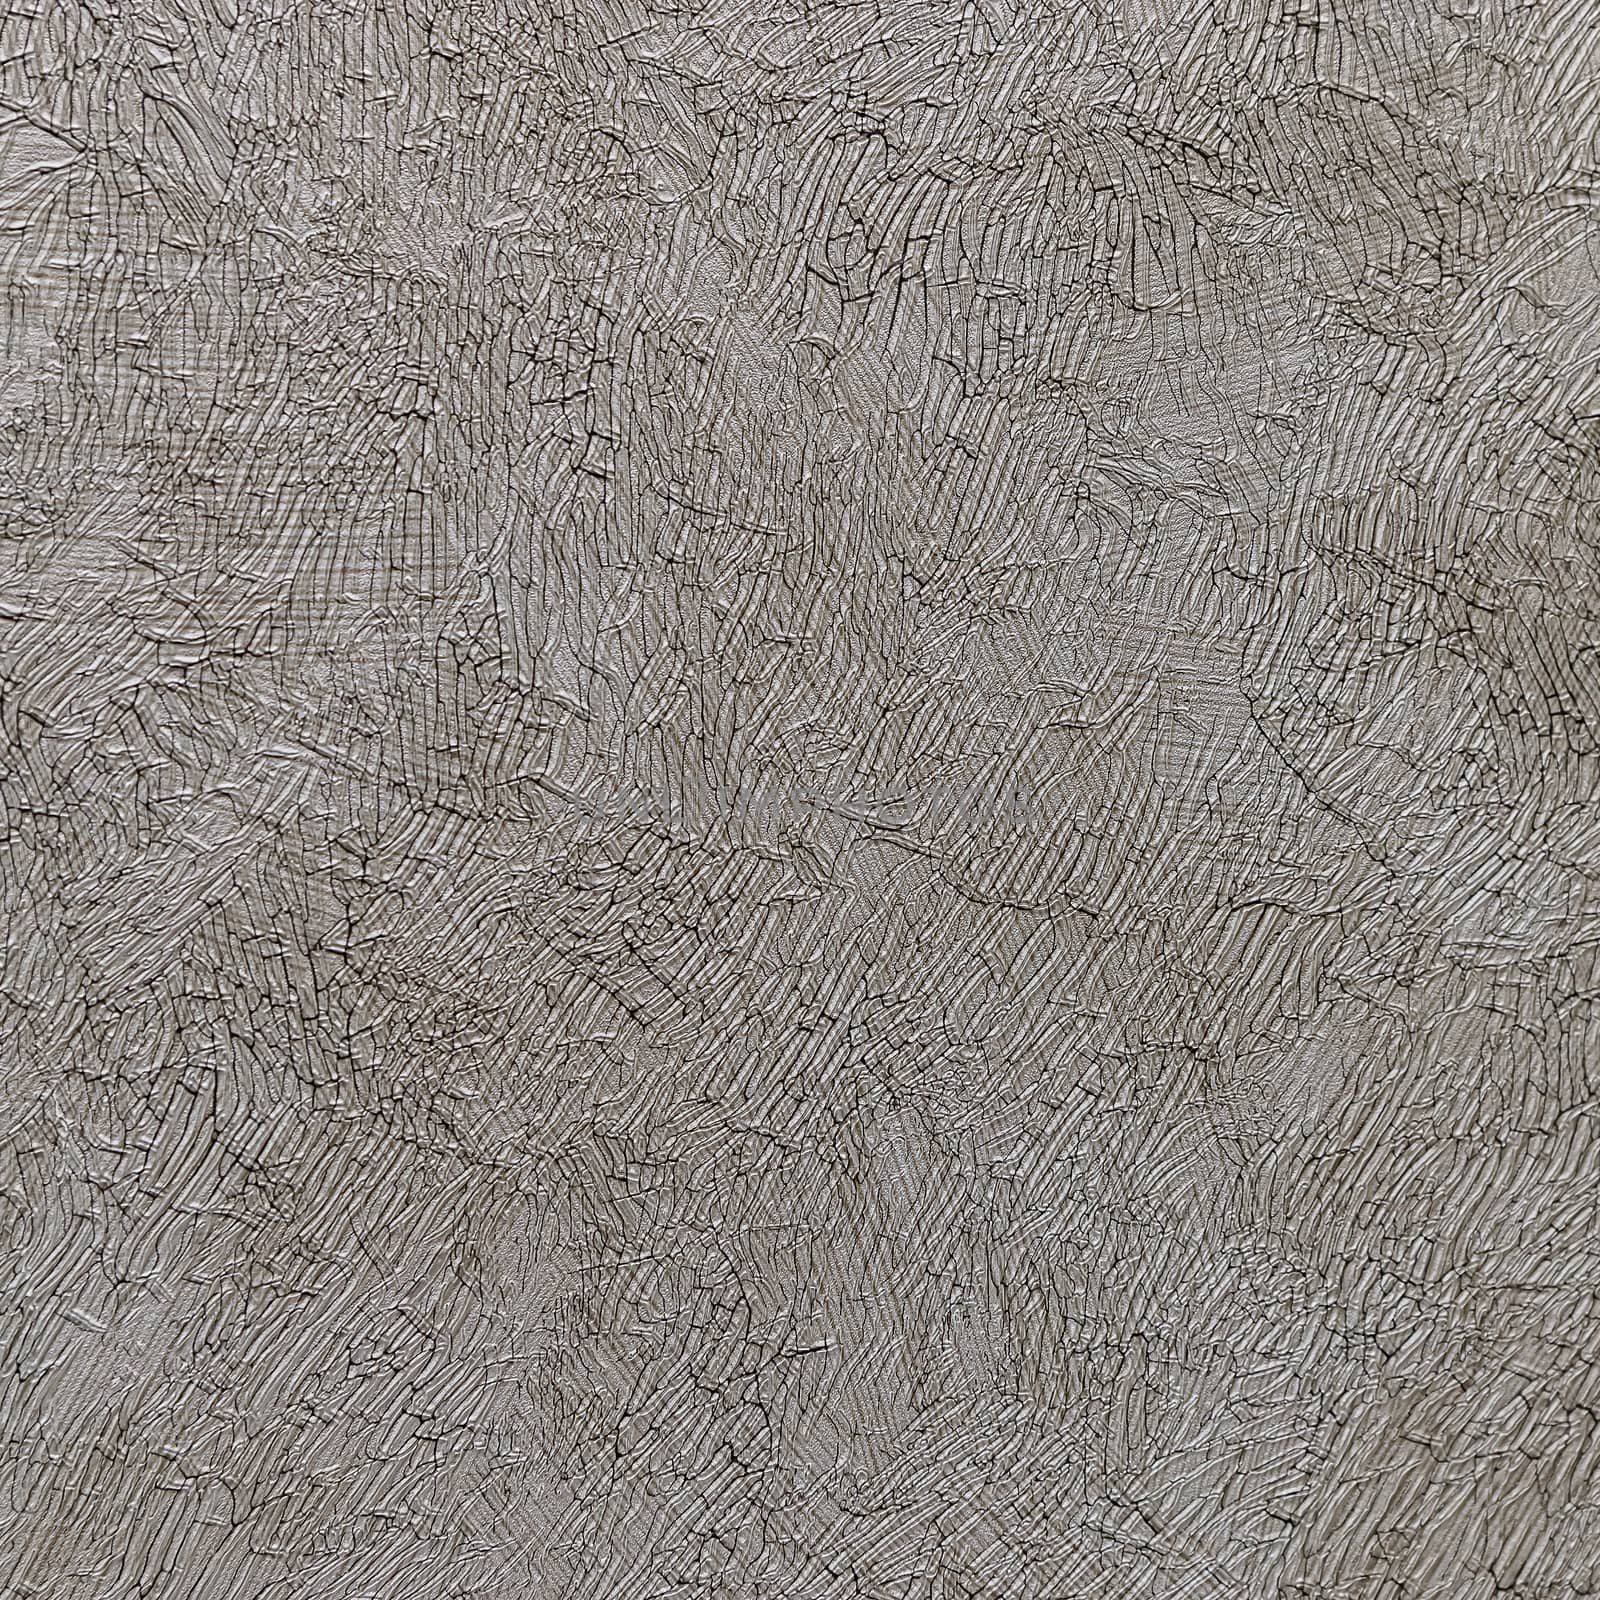 Taupe abstract grungy decorative texture. Textured paper with copy space. Motley gray-brown paper surface, texture closeup.